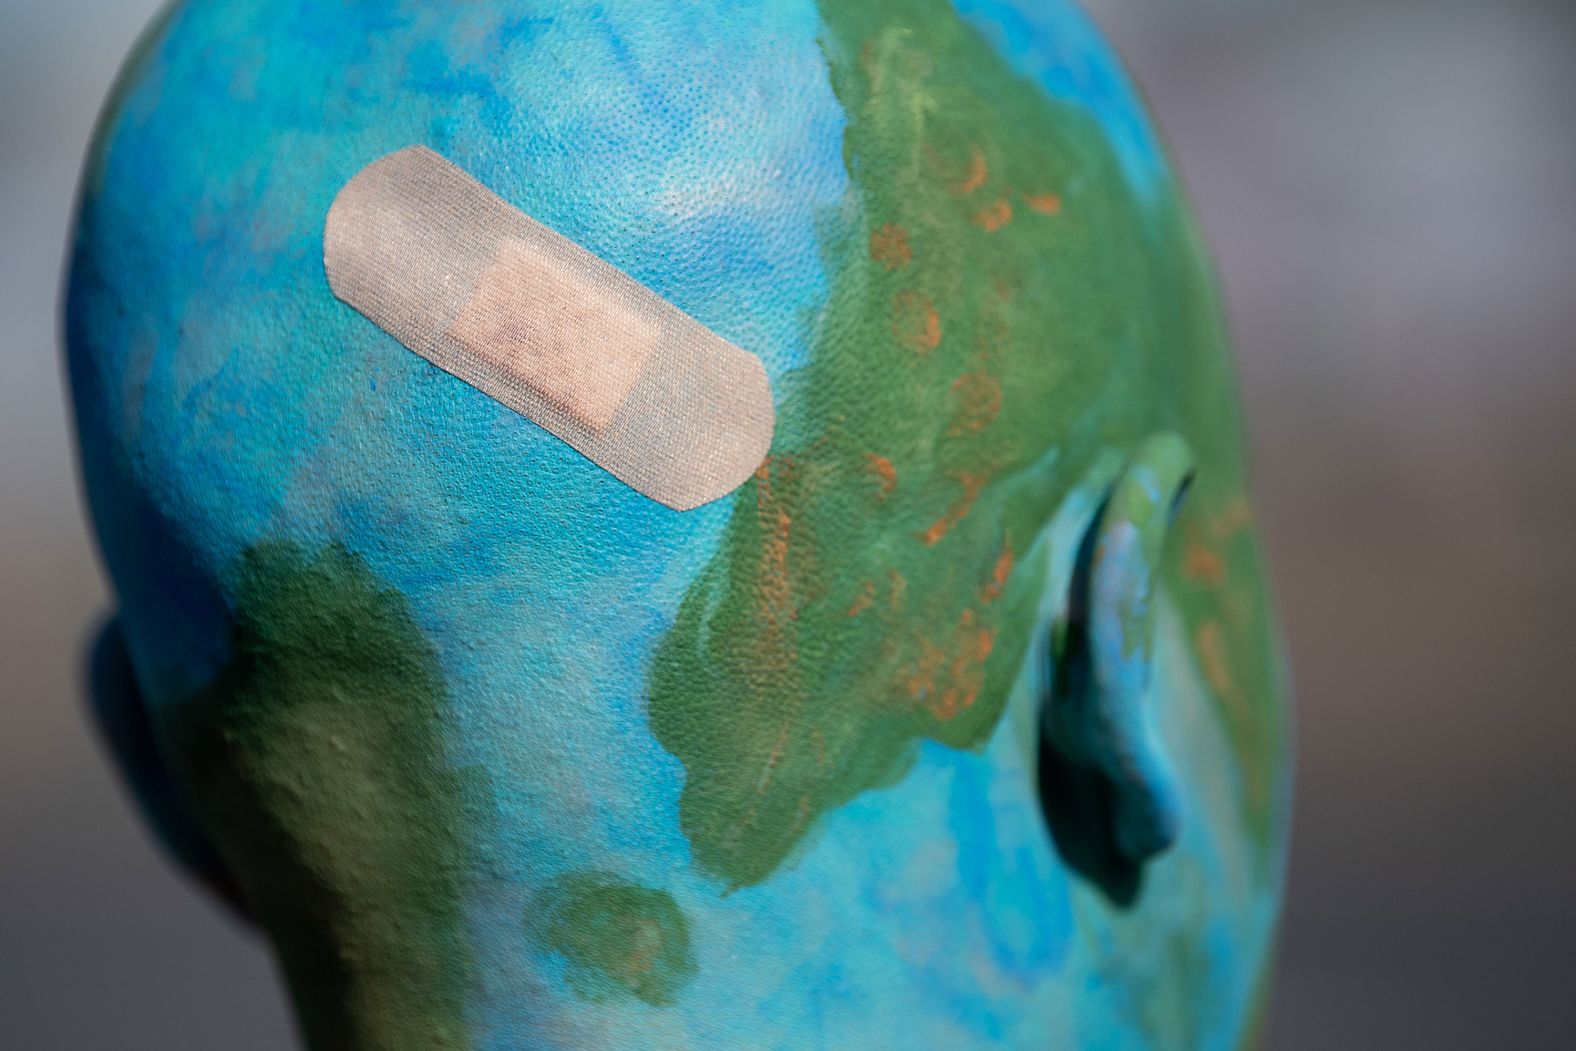 A participant dressed up as an injured earth marches in Stuttgart, Germany.